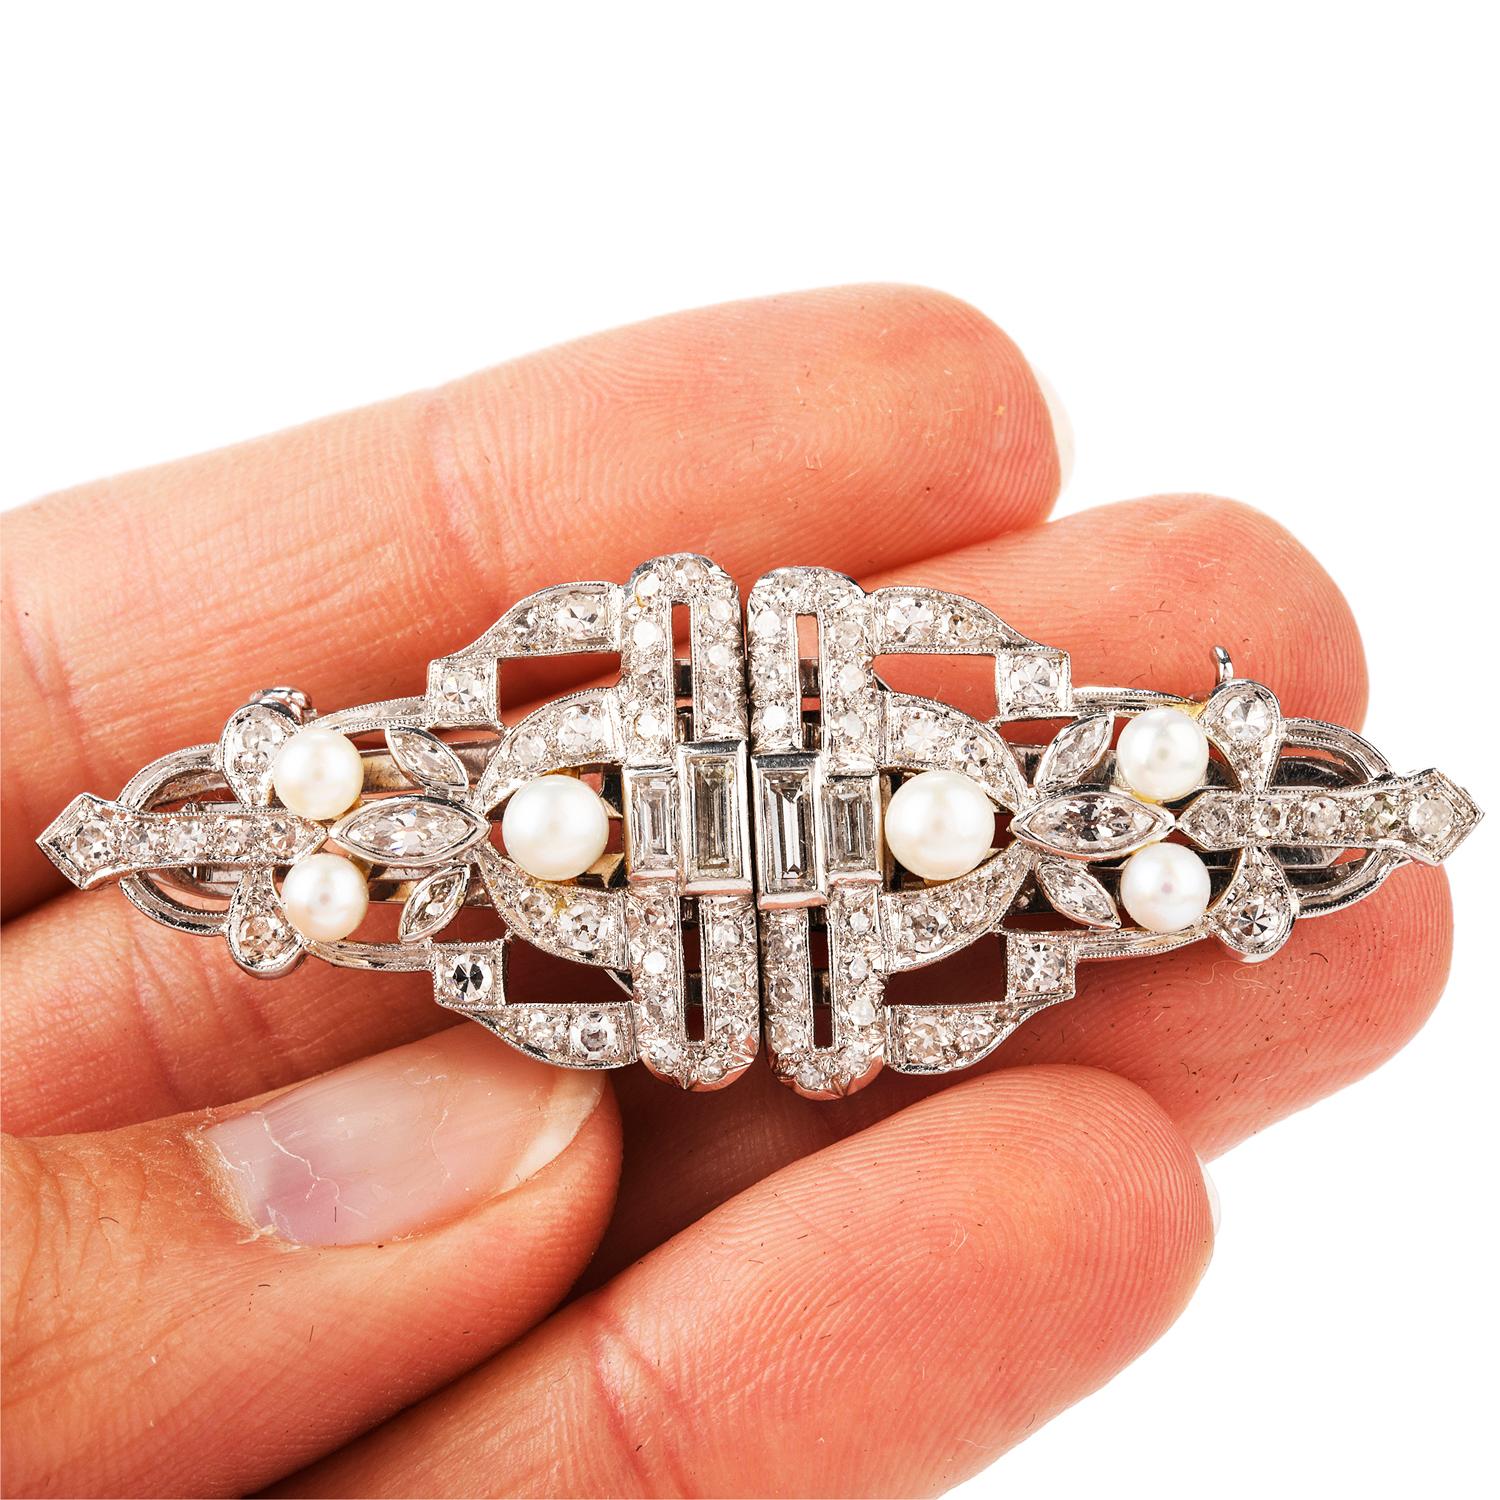 This stately art deco Emerald Cut Diamond Centered Brooch offers a feel of Royalty as the 2 crowns join in the center.

Prominently featured are an Emerald cut weighing approx. 1.48 carats G-H Vs1-VS2 clarity. and 4 large Baguette cut Diamonds